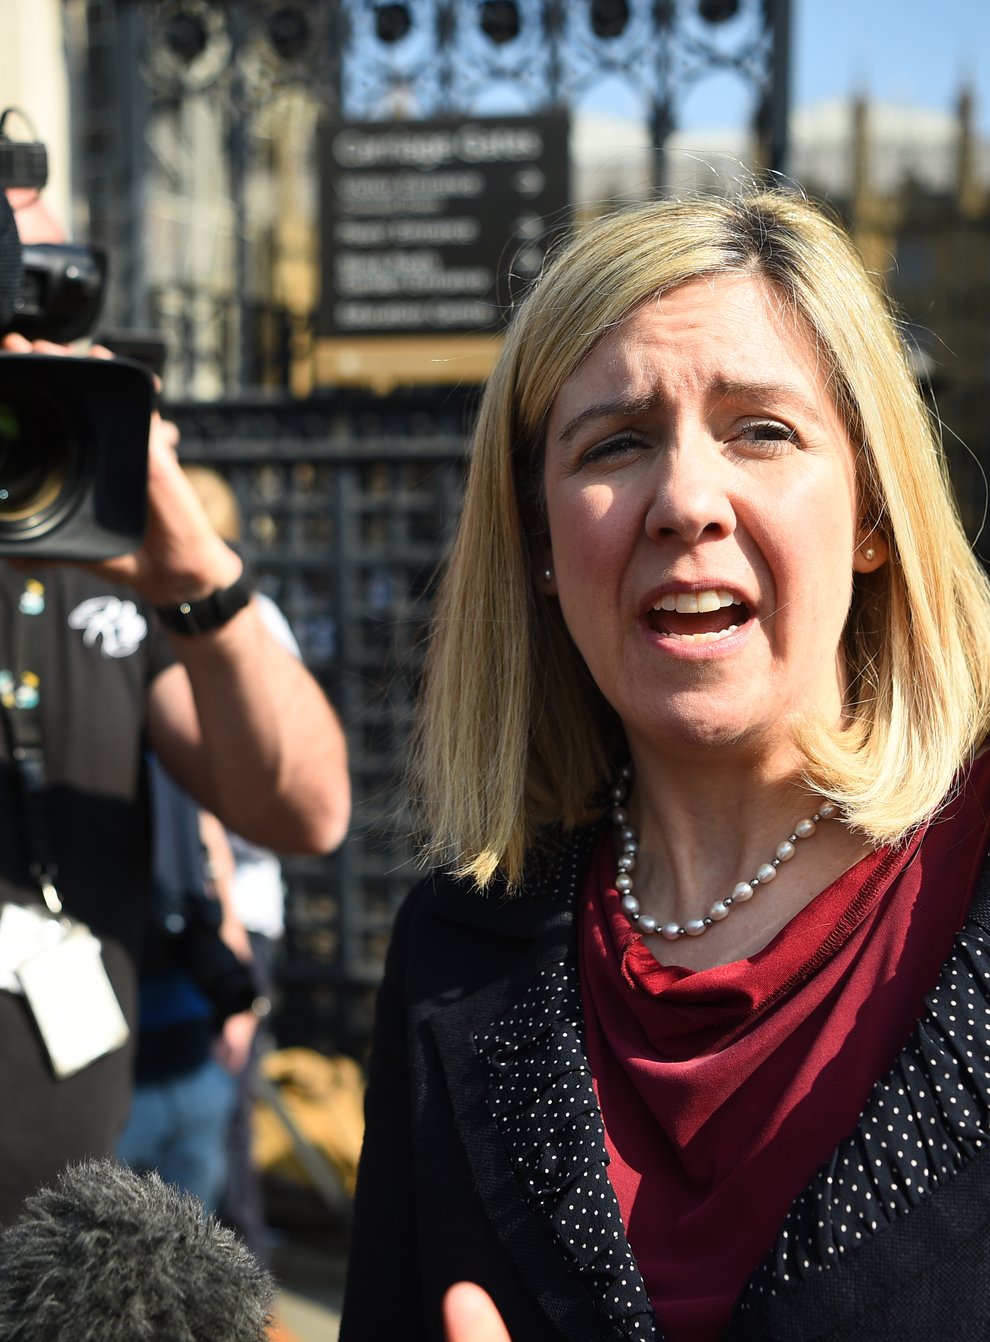 Andrea Jenkyns MP speaking to media at Westminster, London. Ms Jenkyns was caught on camera appearing to make a rude gesture while entering Downing Street. The Tory MP made the sign with her hand as she walked through the black gates, prior to being named education minister (Kirsty O’Connor/PA)